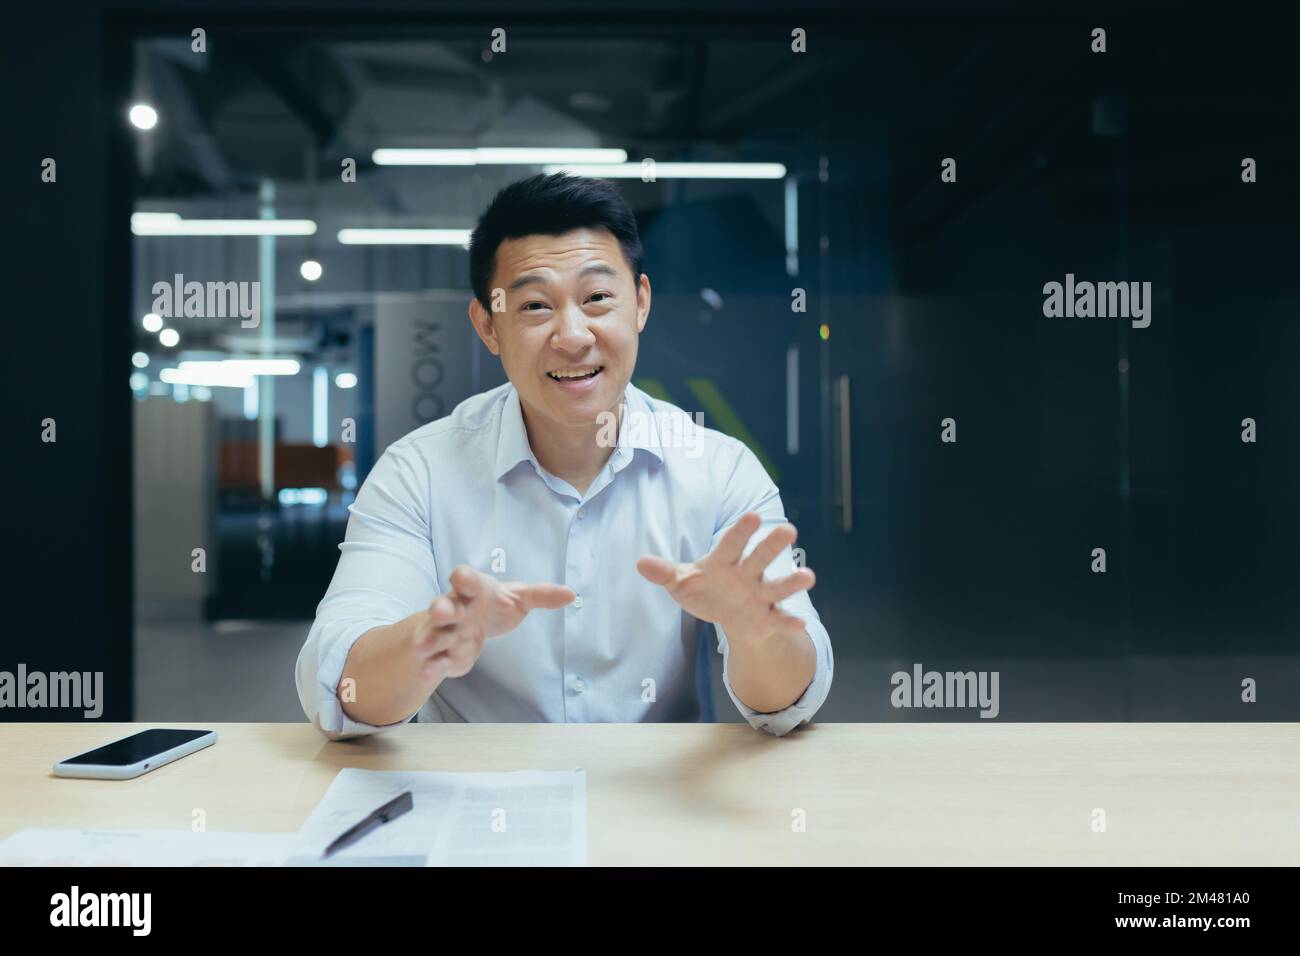 Smiling young Asian man sitting in the office at the desk and talking to the camera. Conducts online meetings, consults, business training. Stock Photo